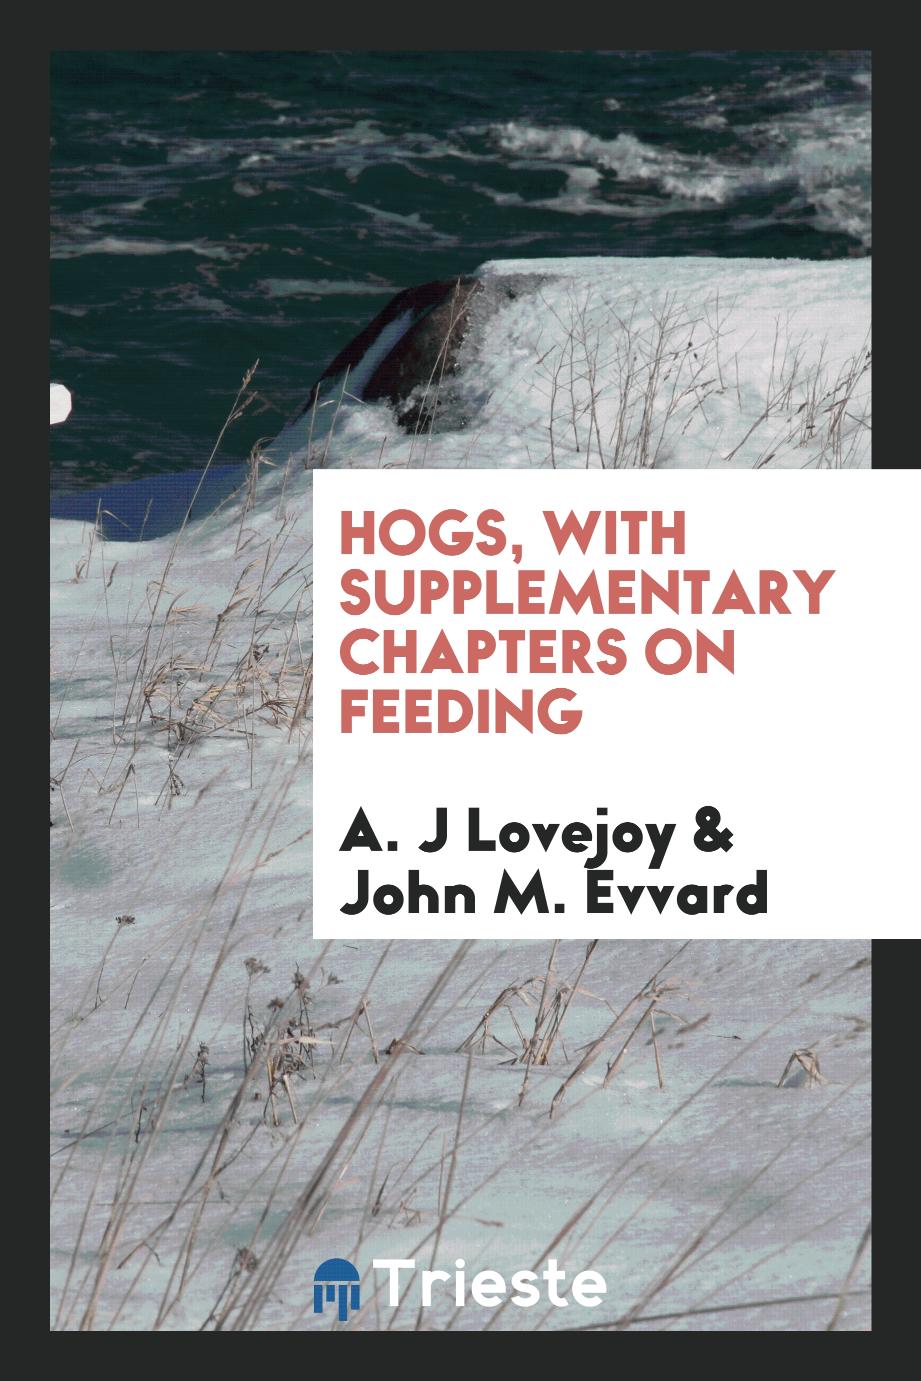 Hogs, with supplementary chapters on feeding